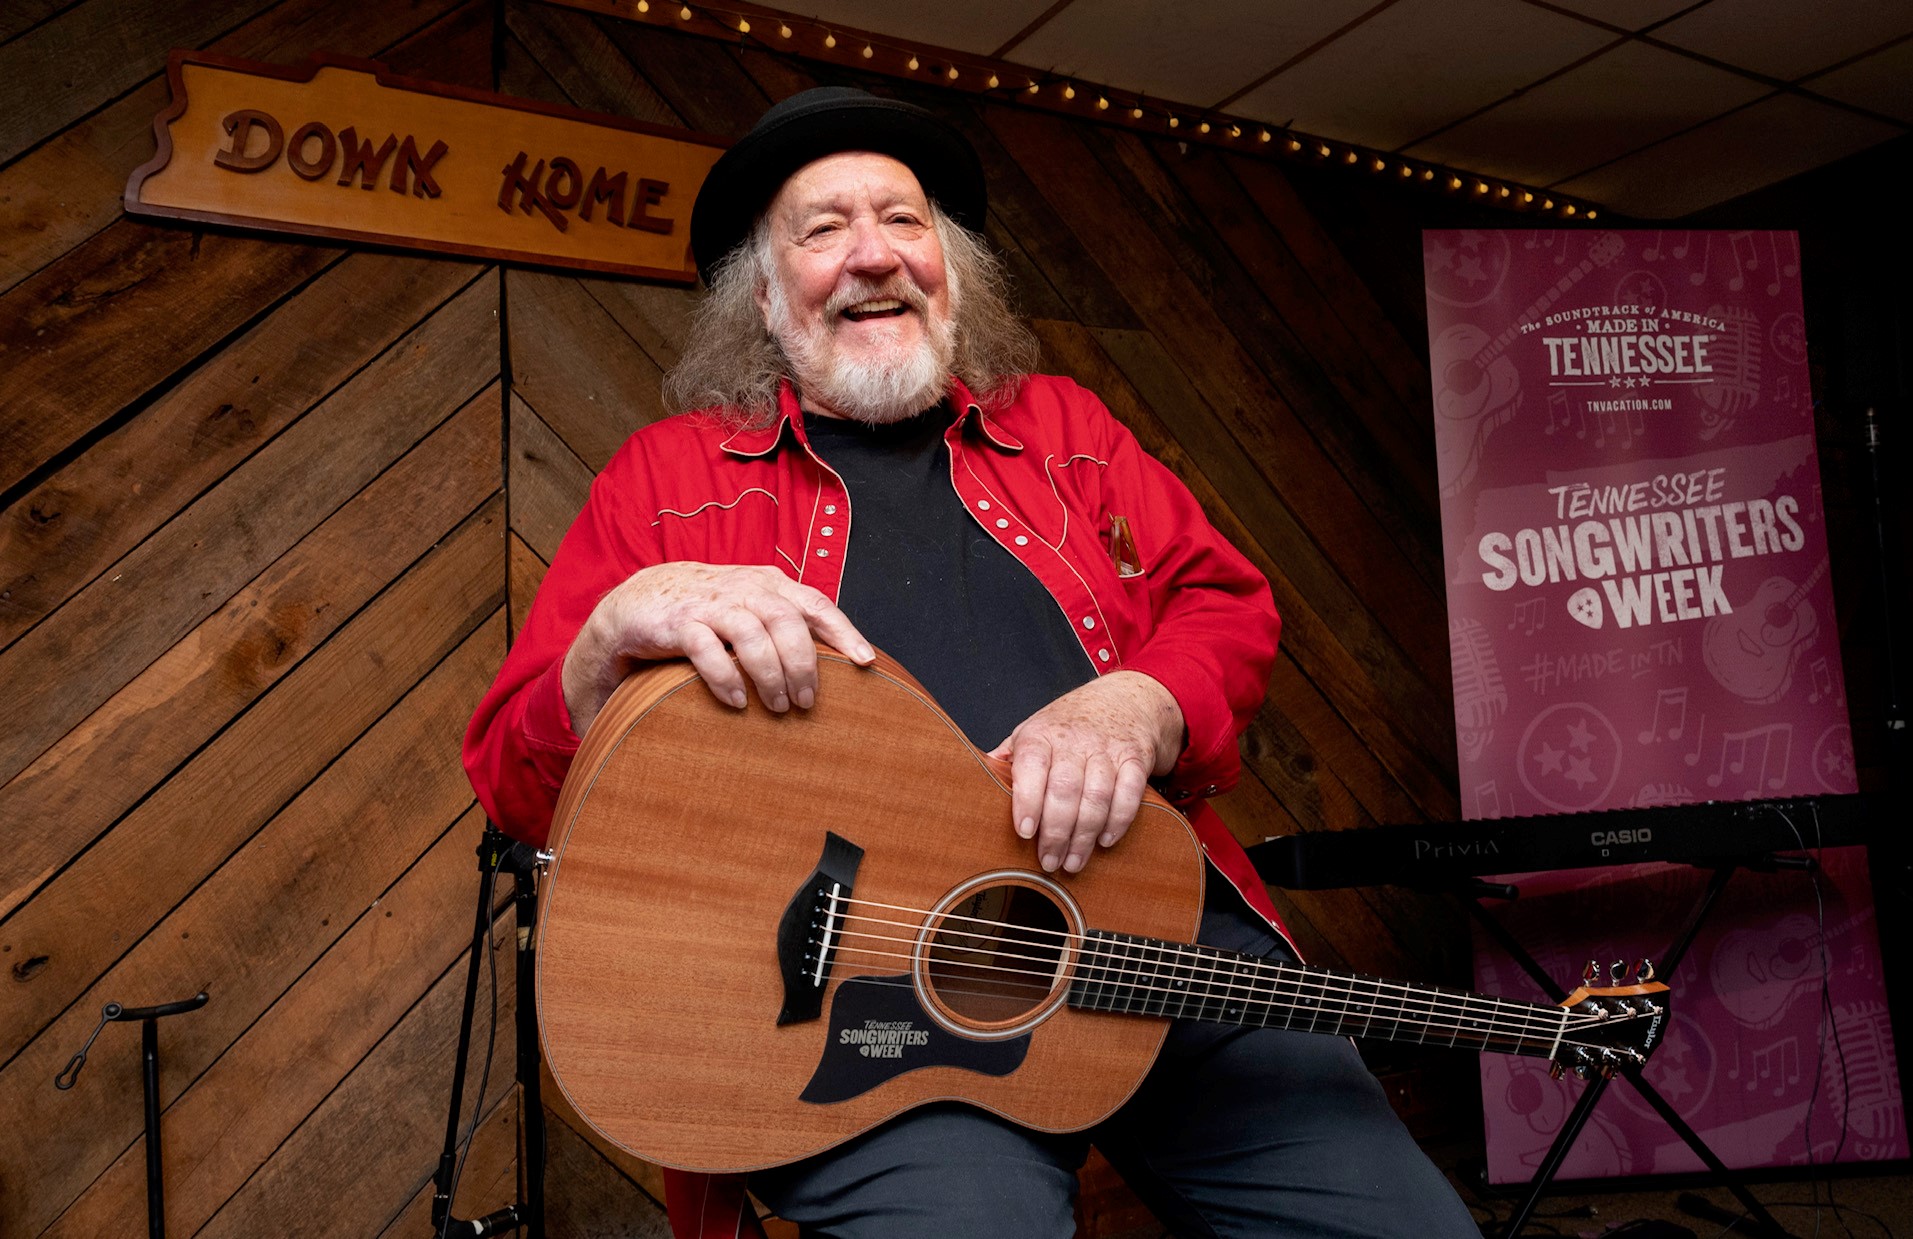 Ron Short Named Tennessee Songwriters Week Finalist at The Down Home in Johnson City